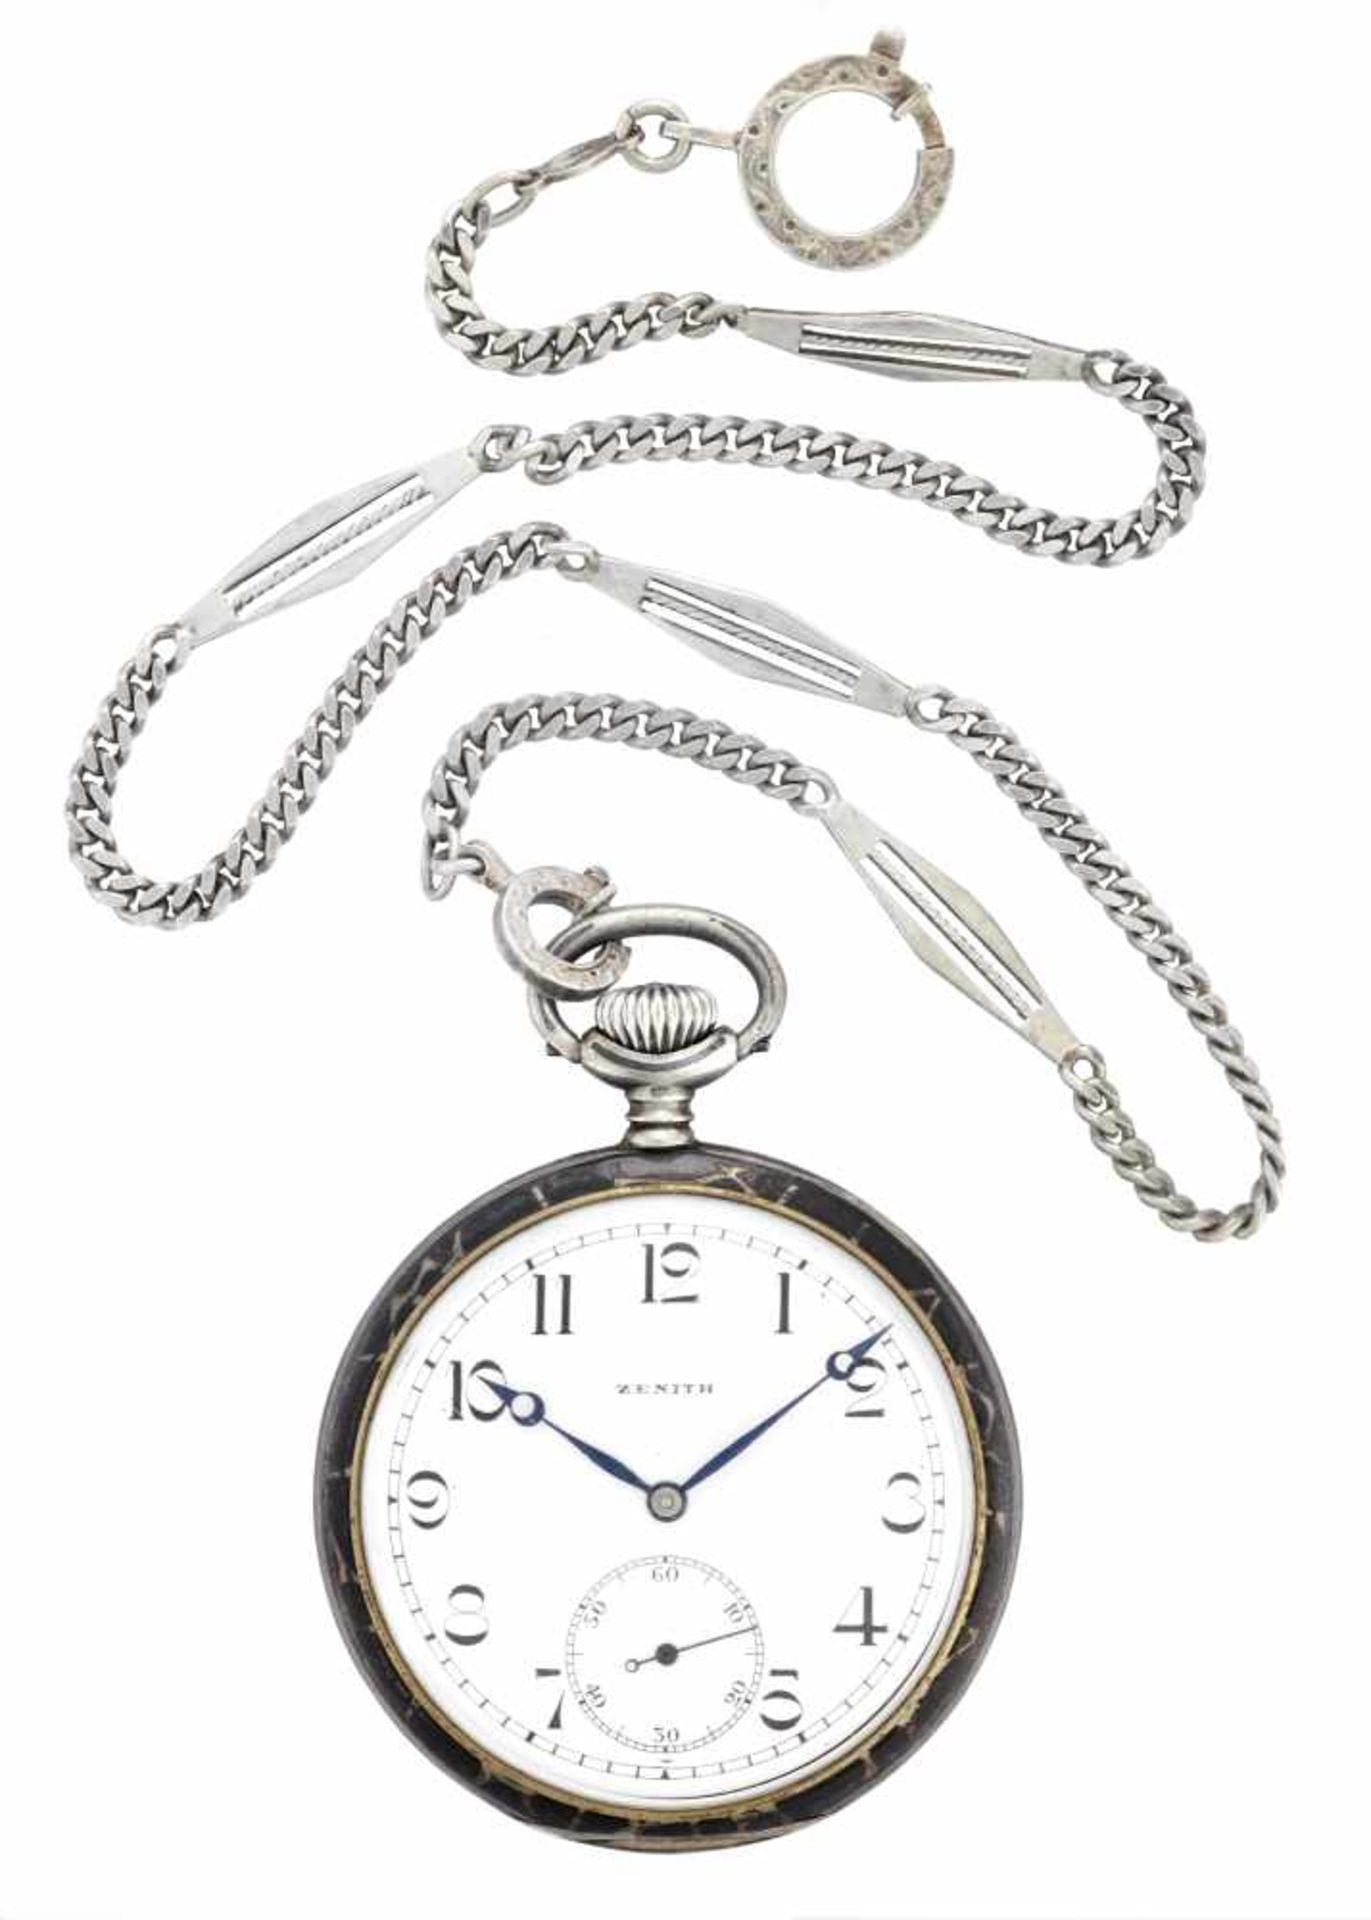 ZENITHSilver pocket watch with chaineEarly 20th centuryDial, movement and case signedManual wind